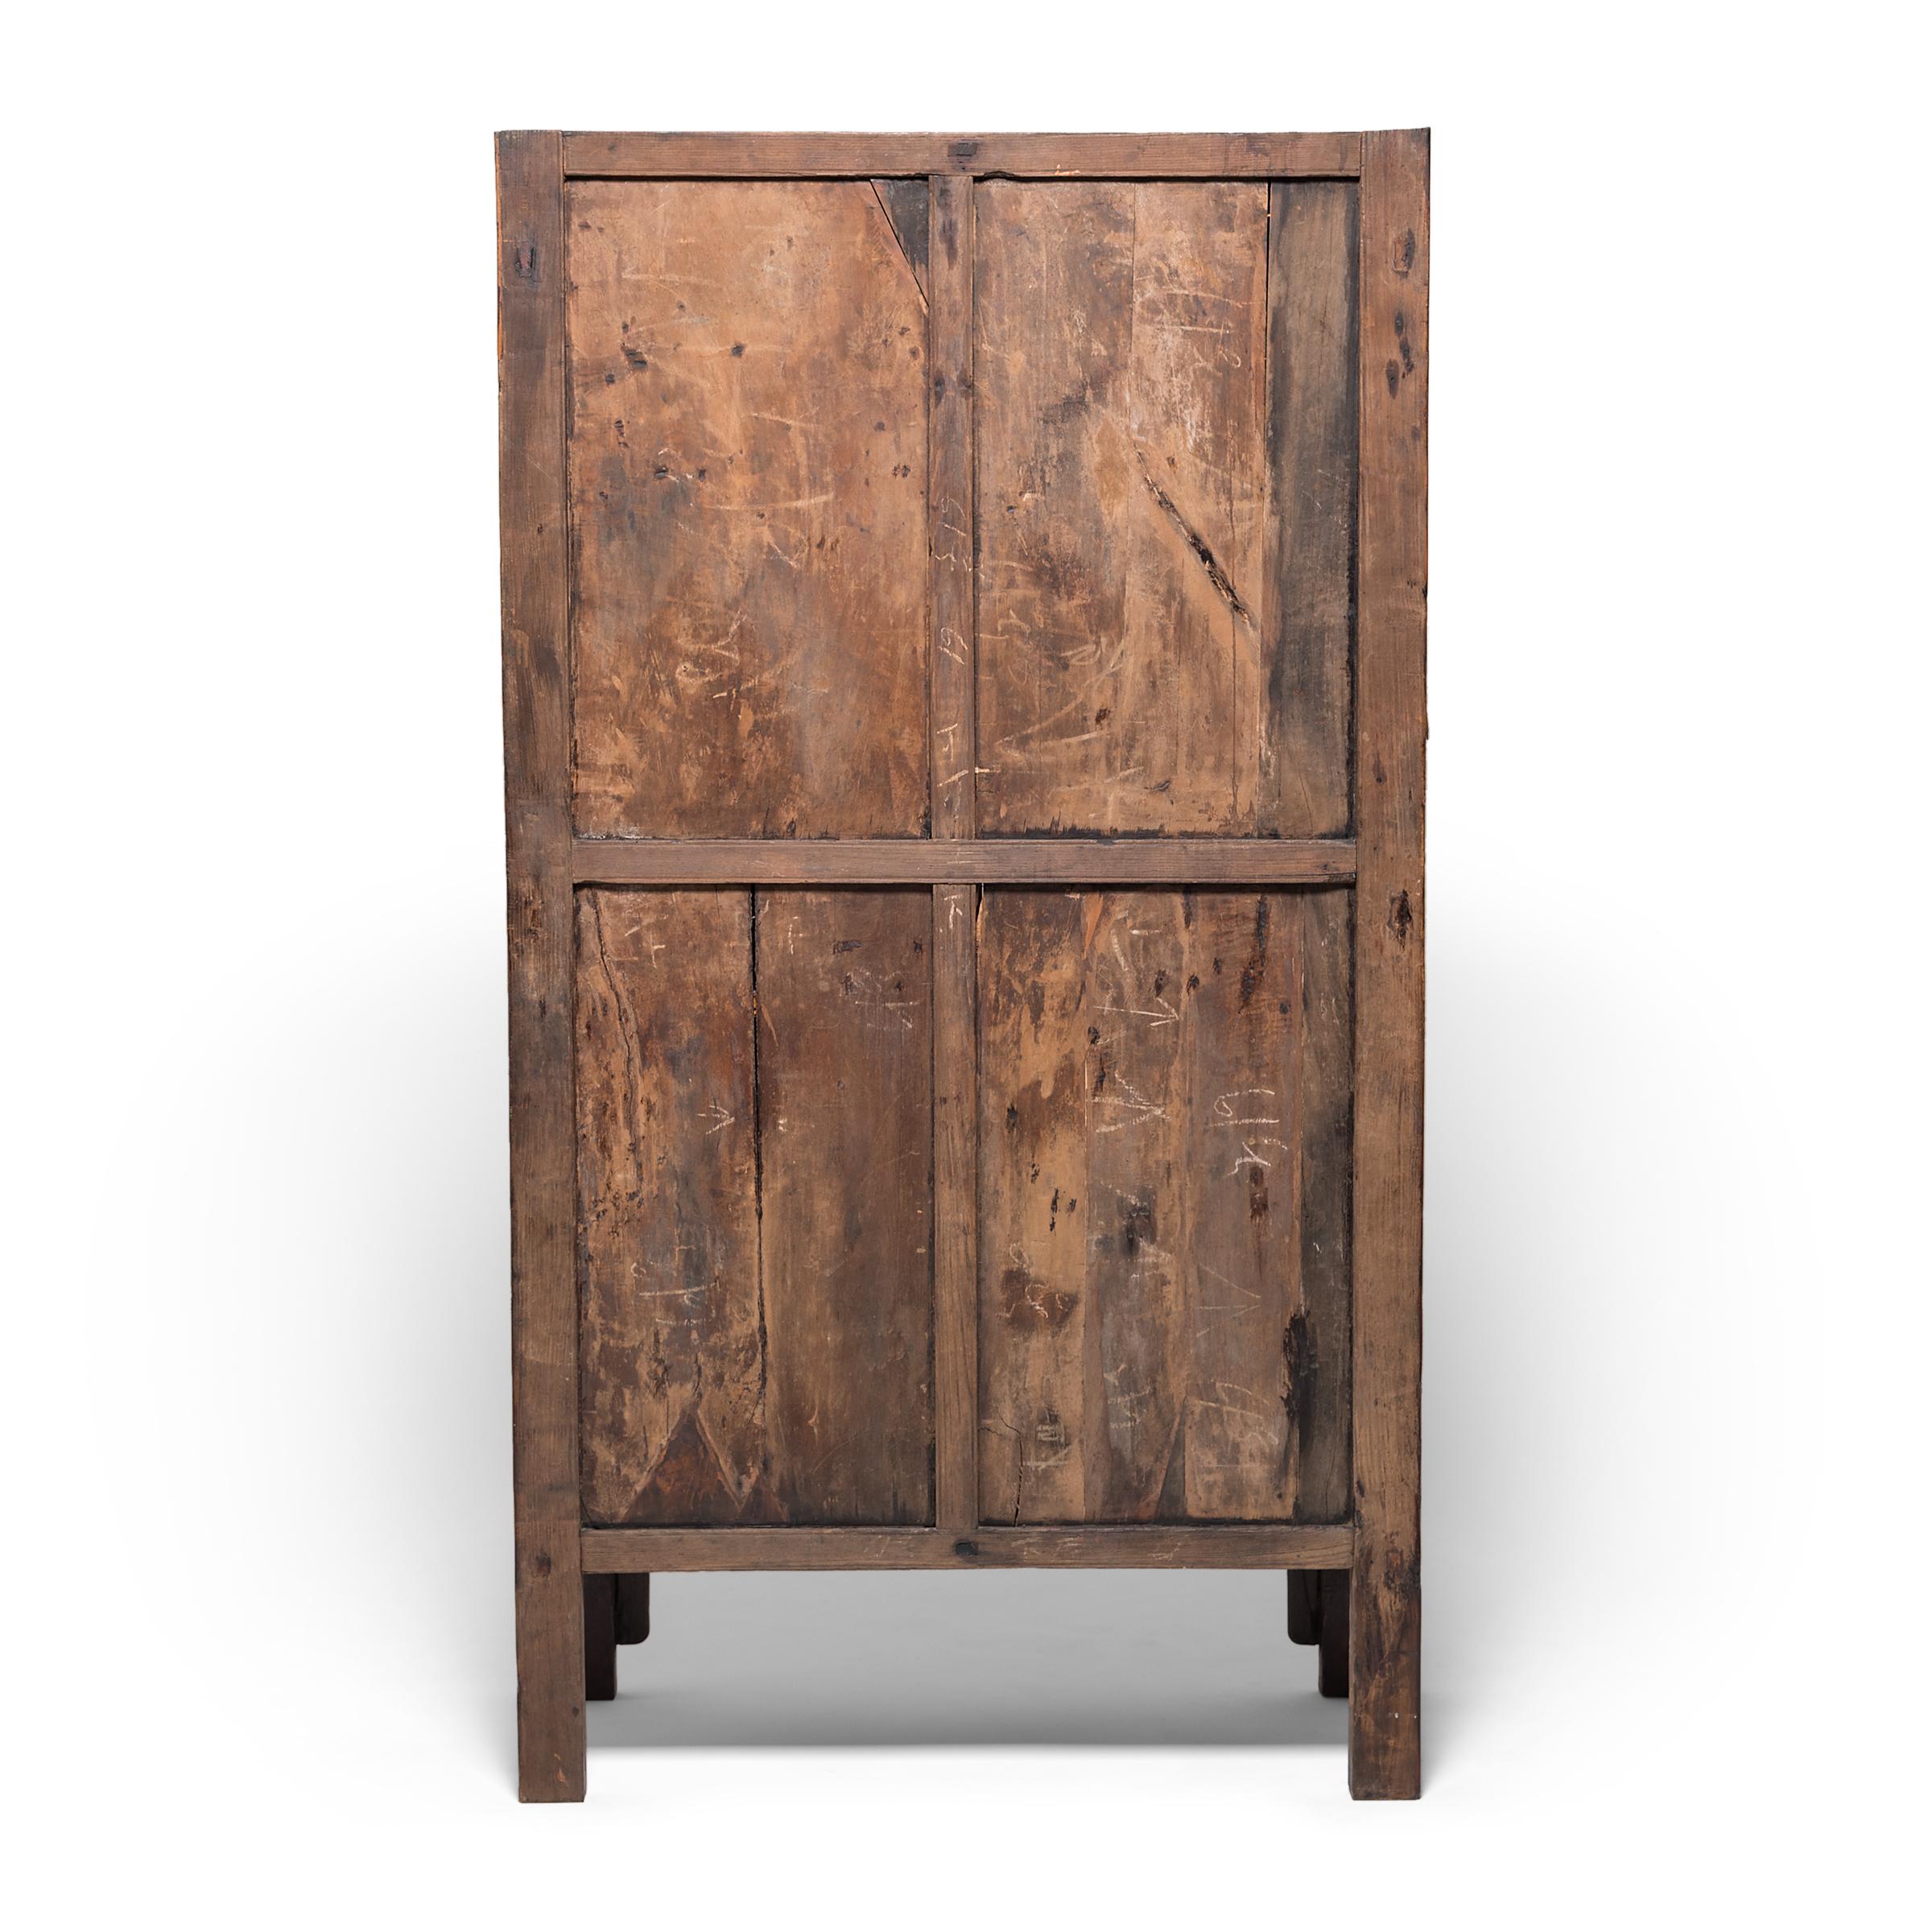 Qing Chinese Paneled Storage Cabinet, c. 1650 For Sale